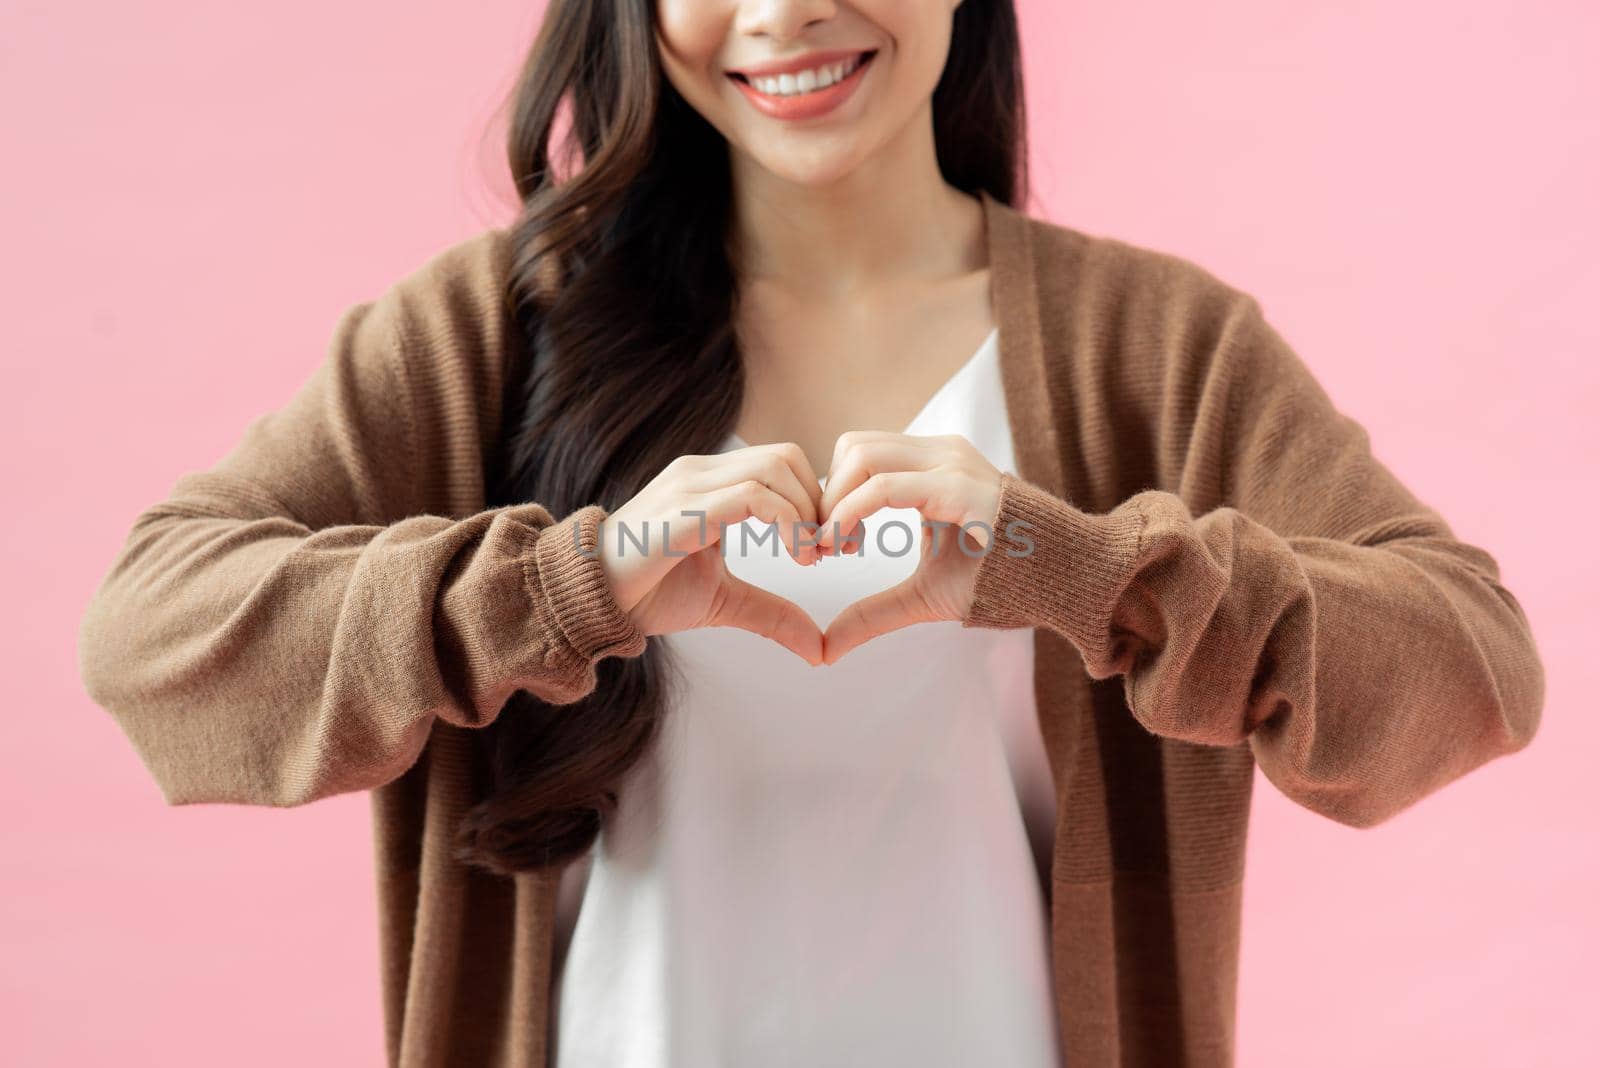 young woman who makes a heart shape by her hand.